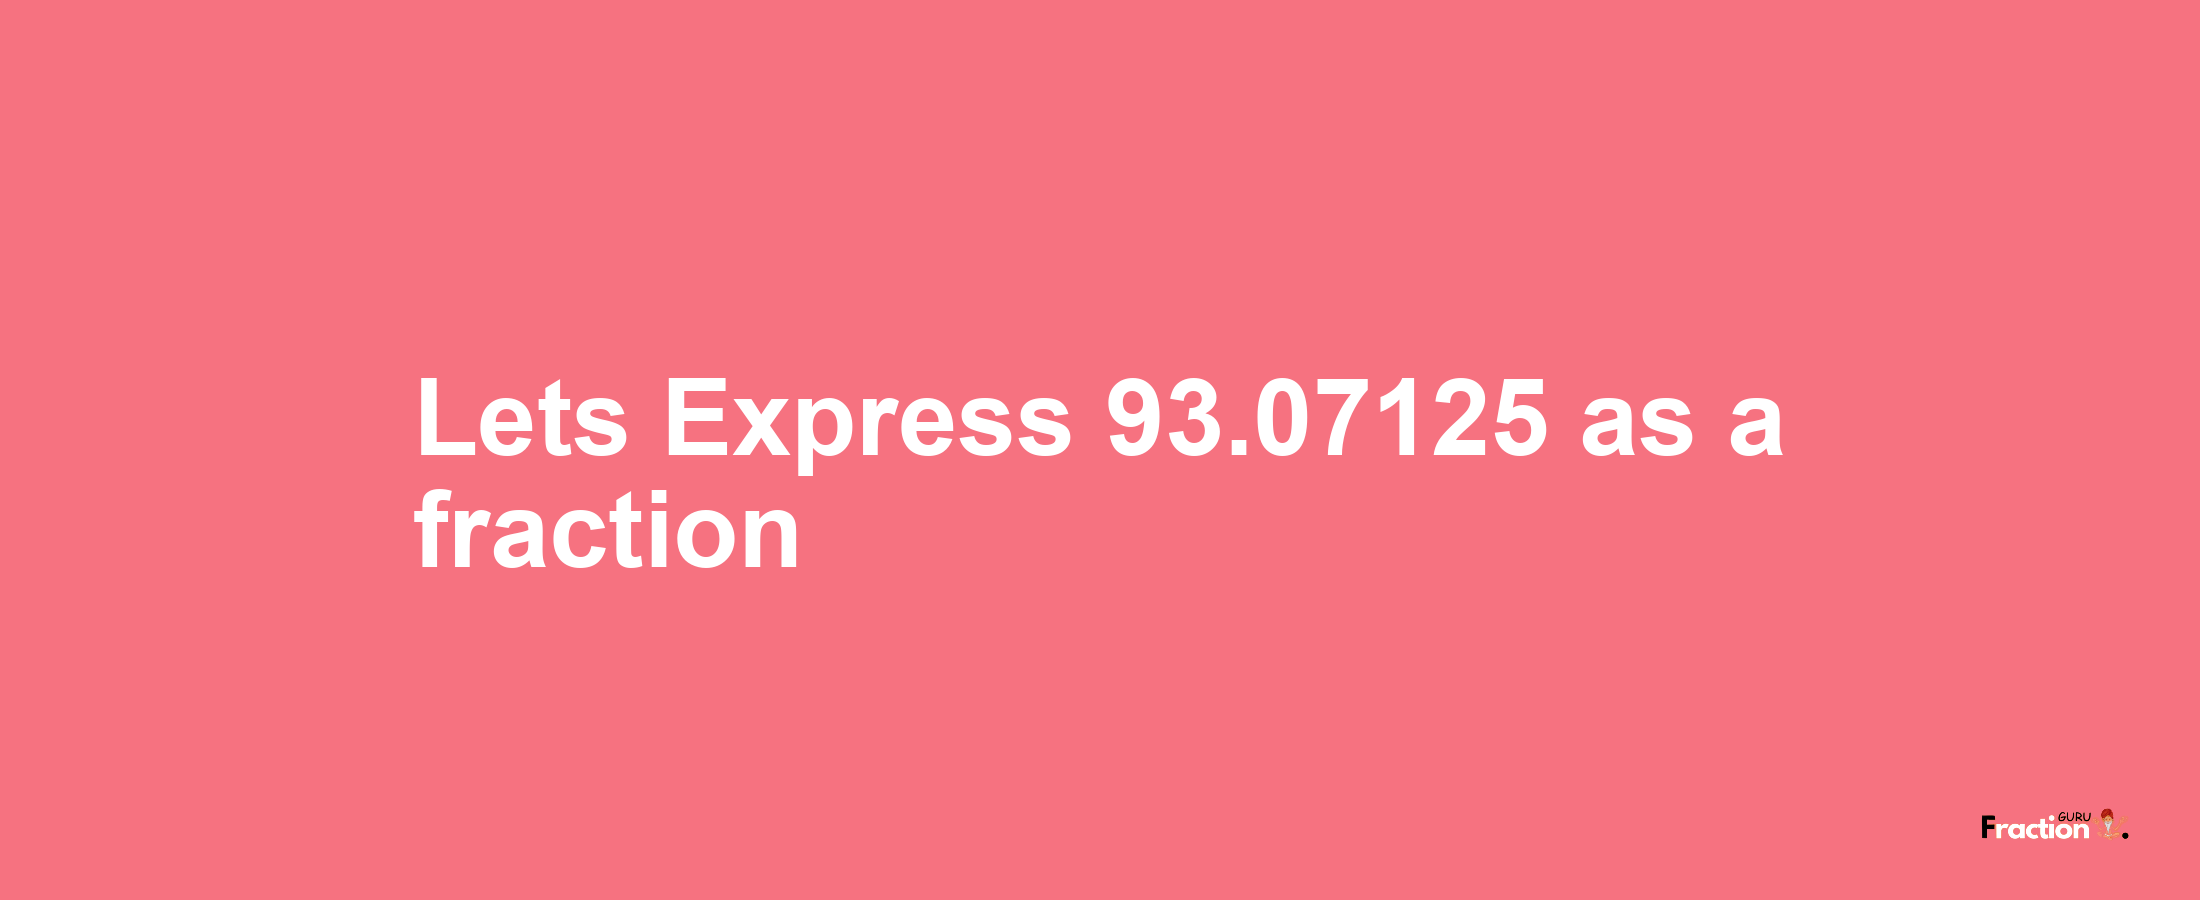 Lets Express 93.07125 as afraction